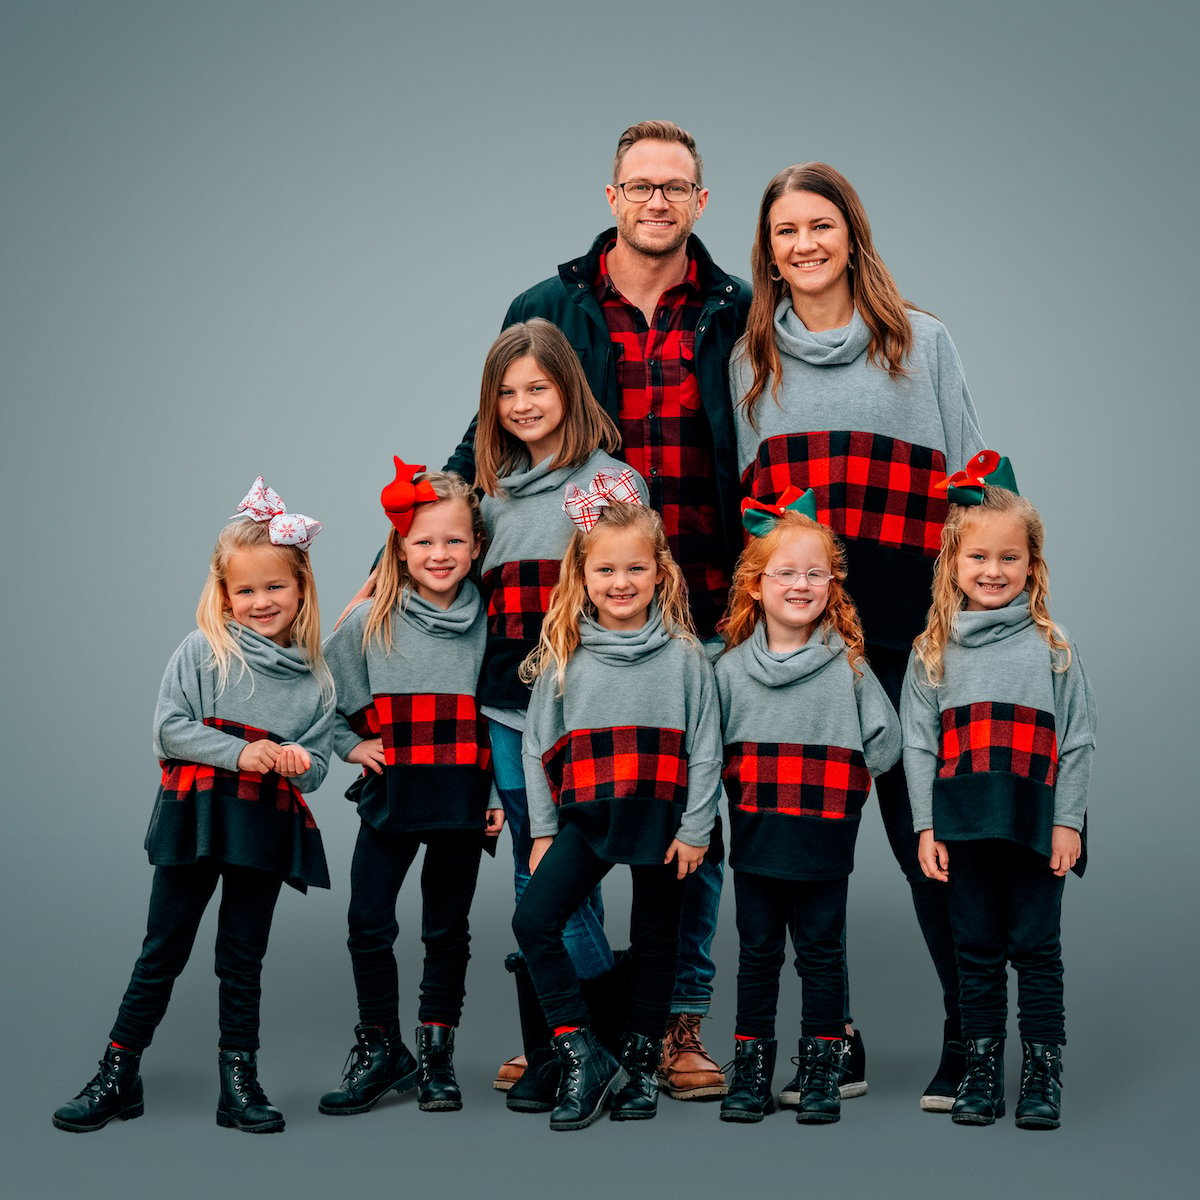 photo of the Busby family from 'OutDaughtered', wearing matching gray and plaid tops, on gray background